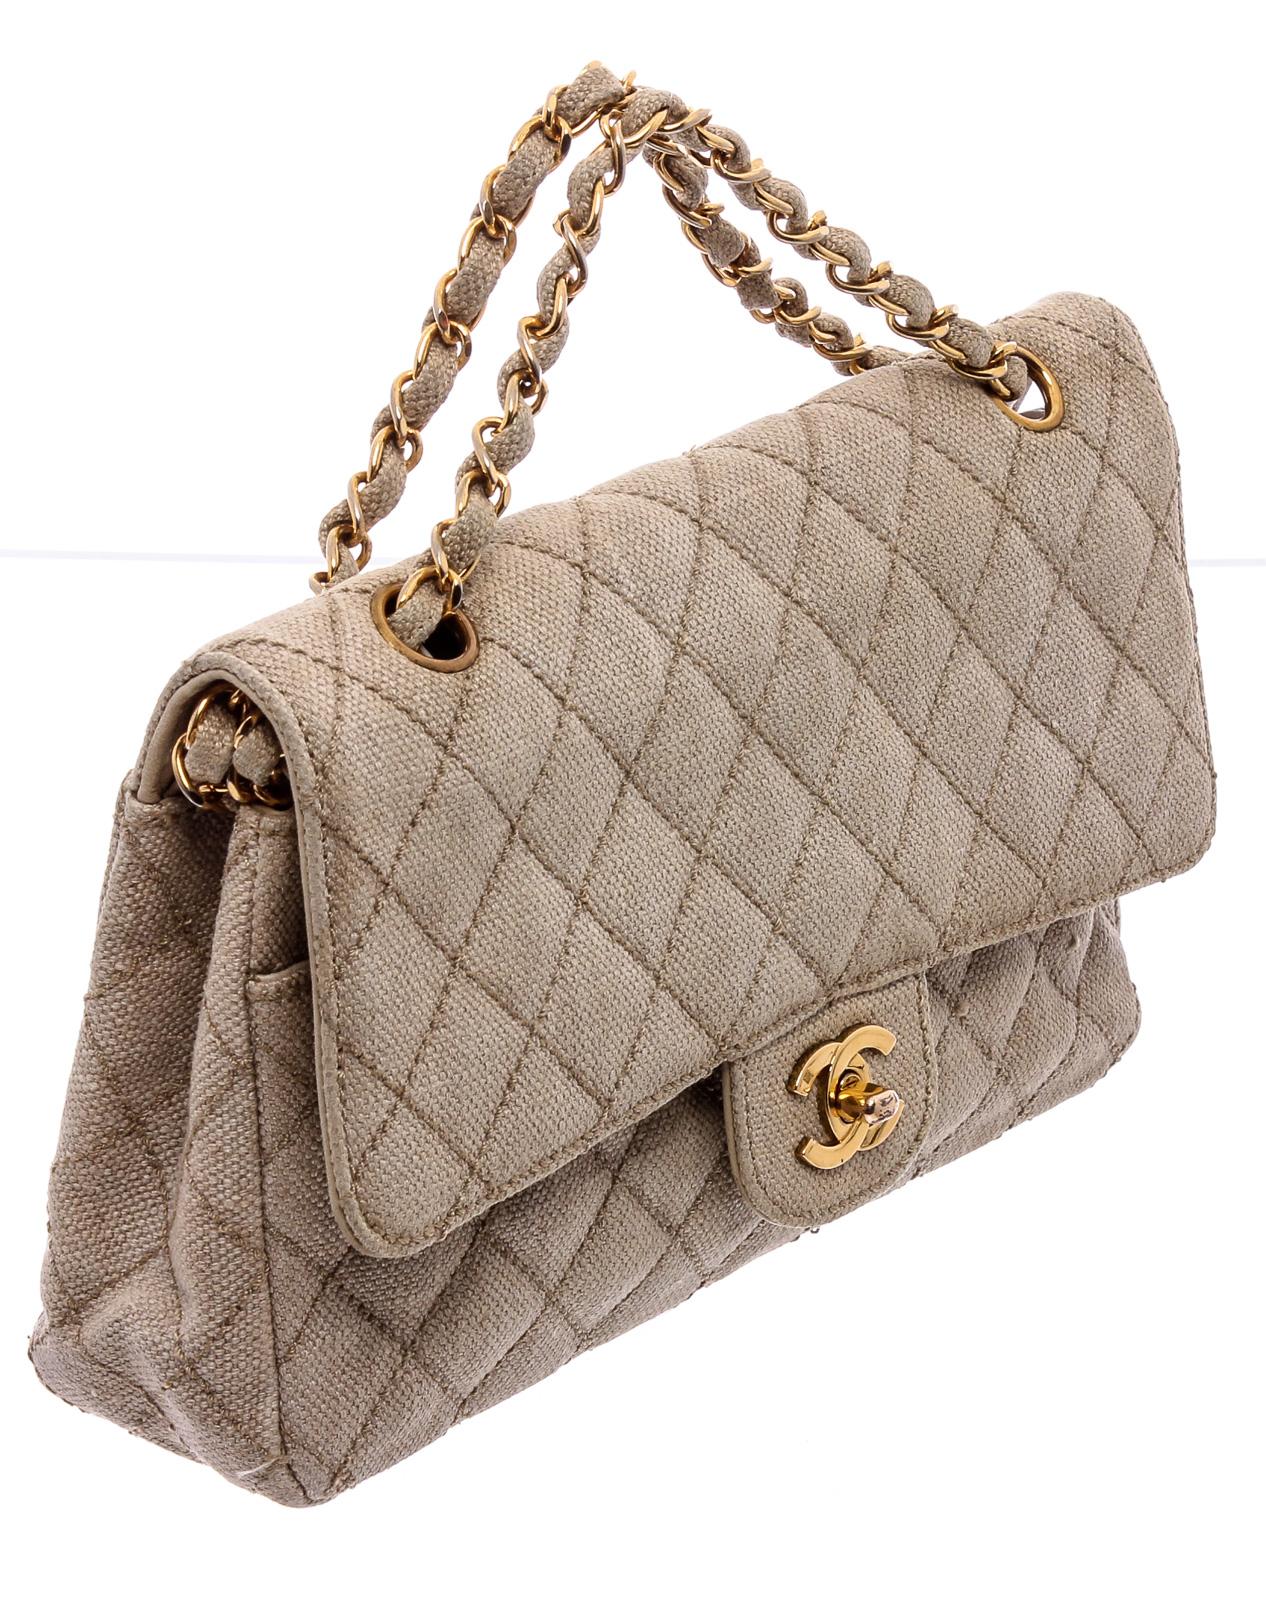 Beige quilted fabric Chanel Classic Medium Double Flap Bag with gold-tone hardware, patch pocket at back, dual chain-link and leather shoulder straps, pocket under flap with zip closure, beige leather interior, stitched CC logo under secondary flap,